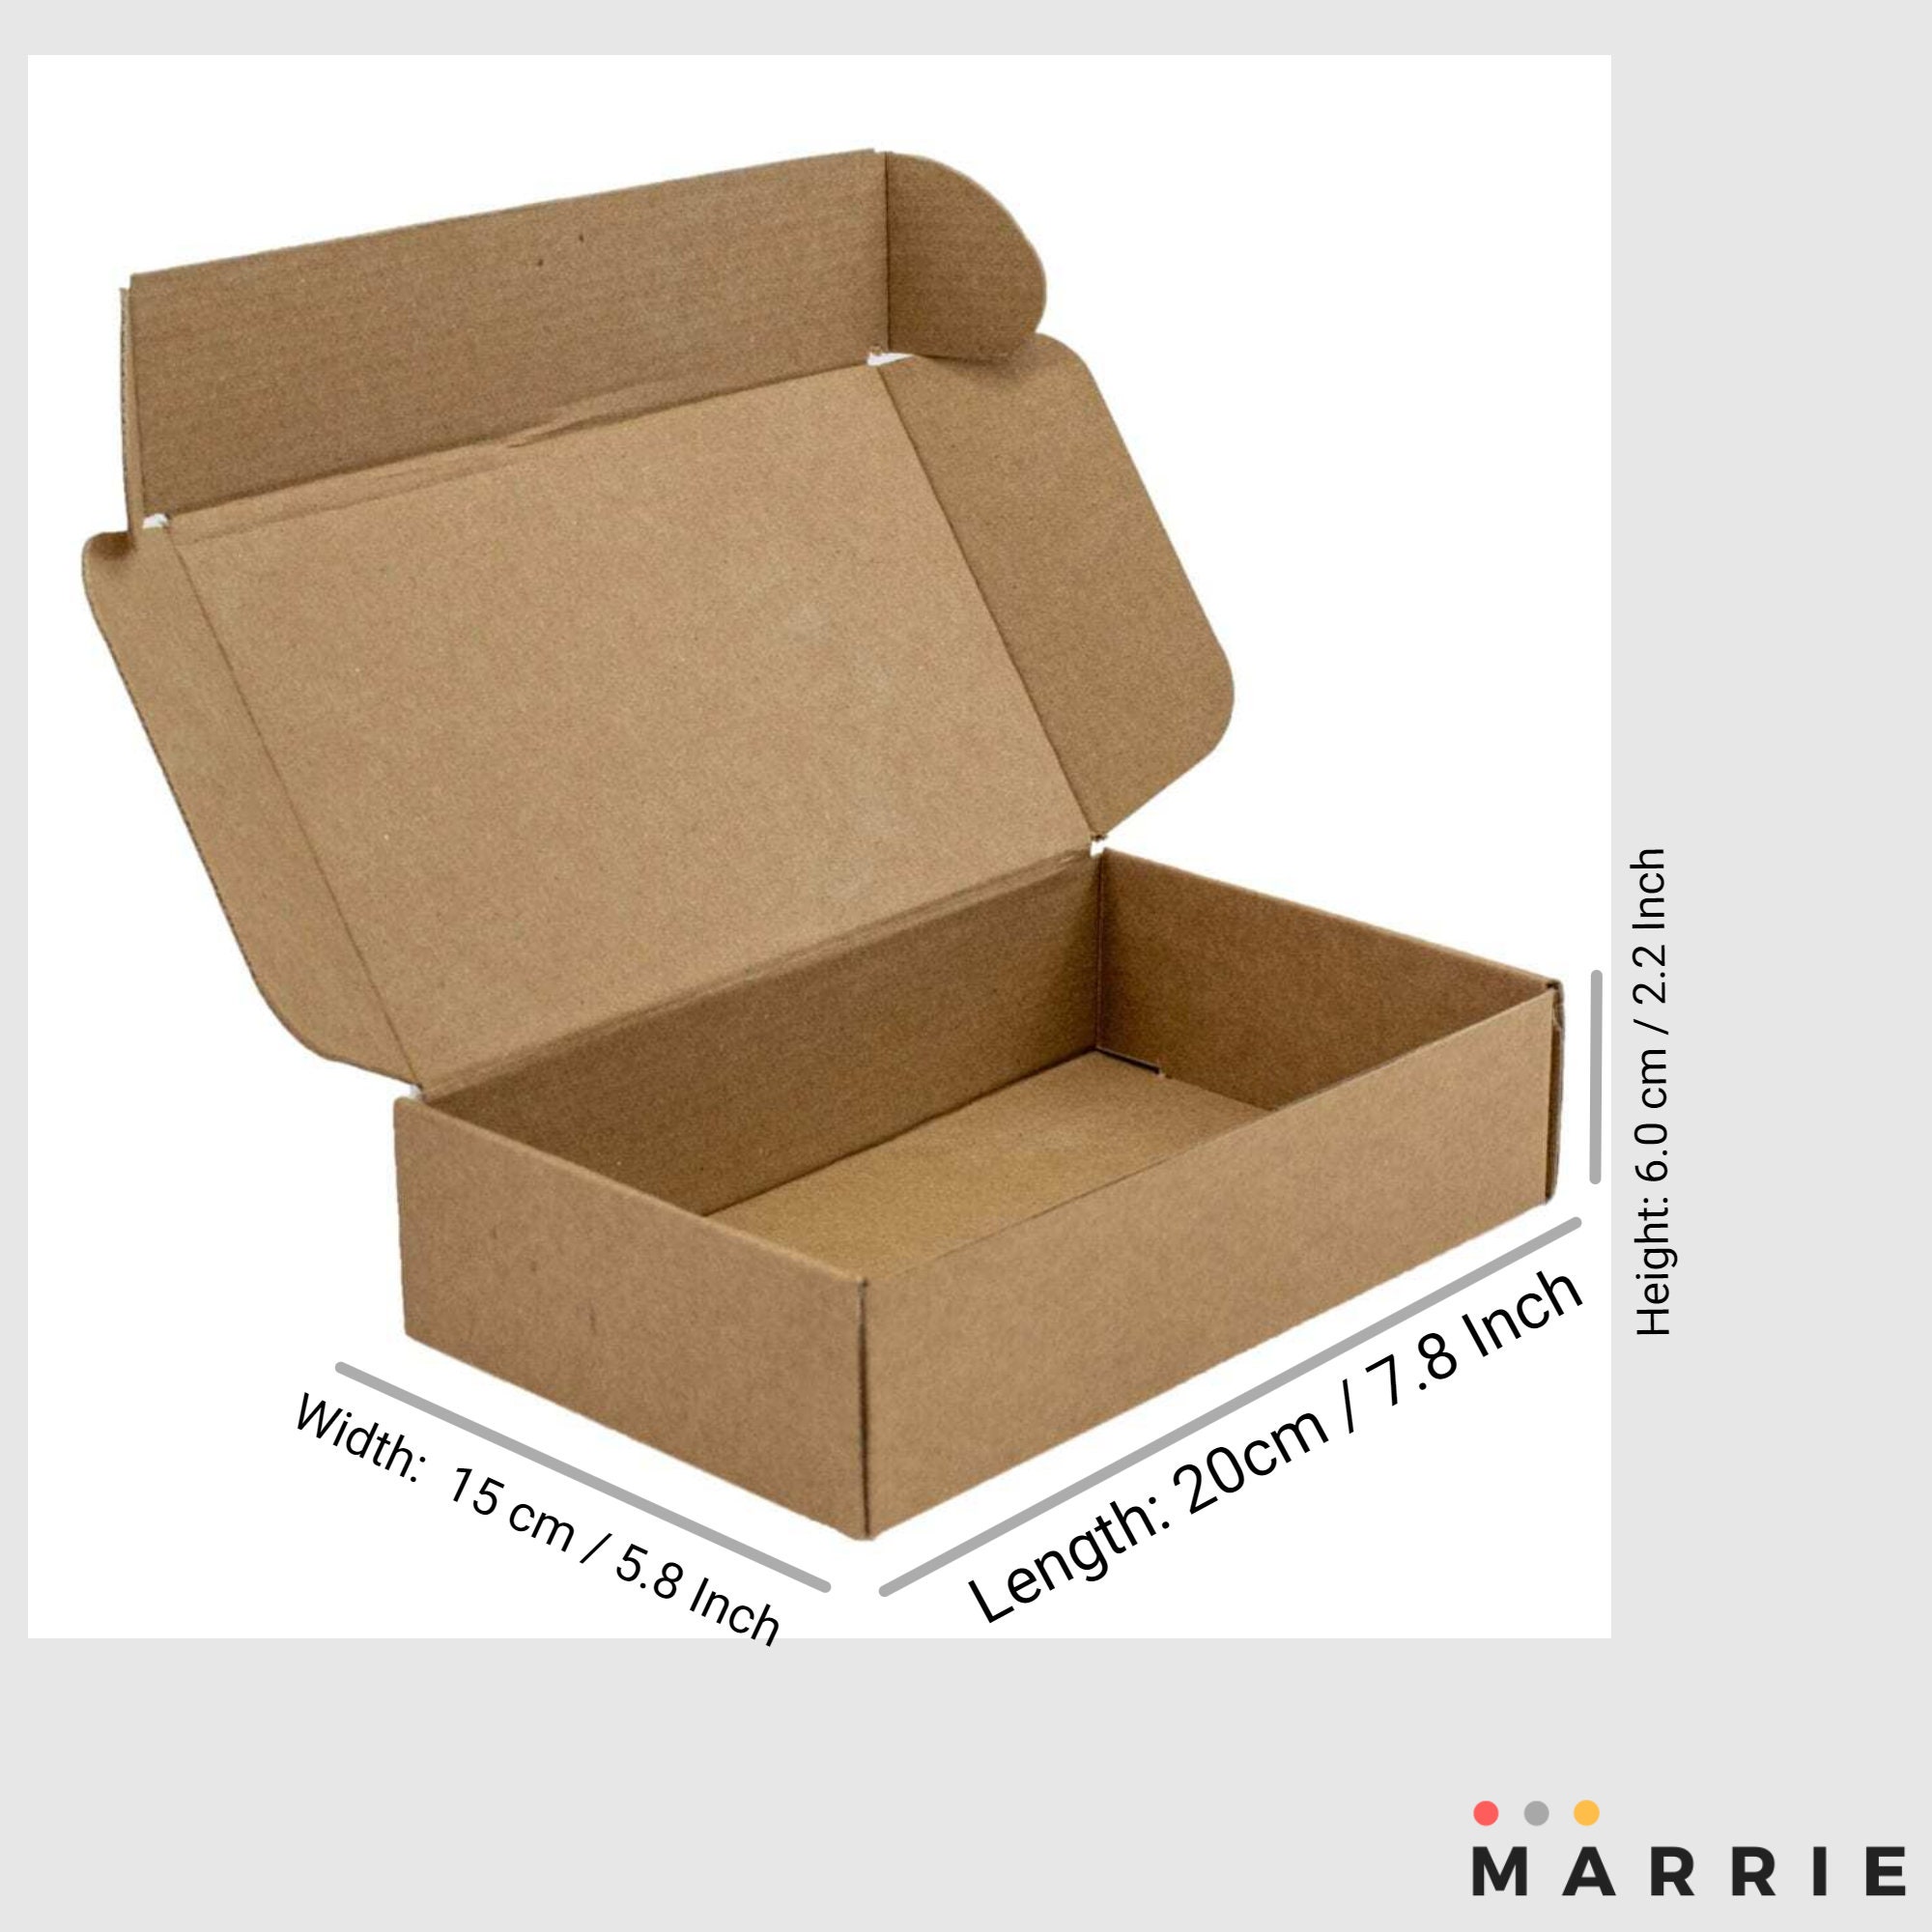 Box With Lid Template 2x2x2 Gift Pdf SVG DXF EPS Png Jpg